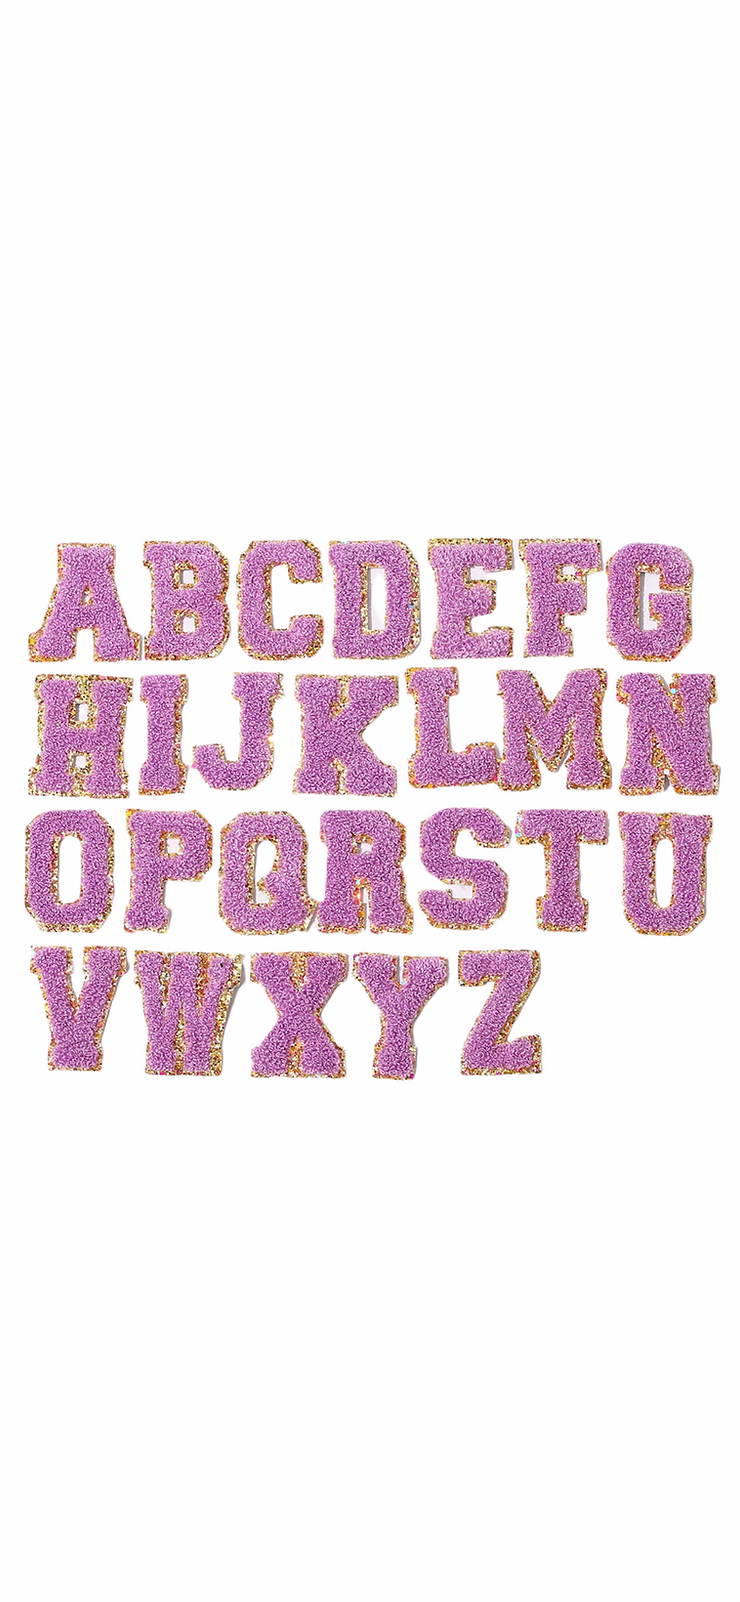 Letter Patches - White, Hot Pink, Purple